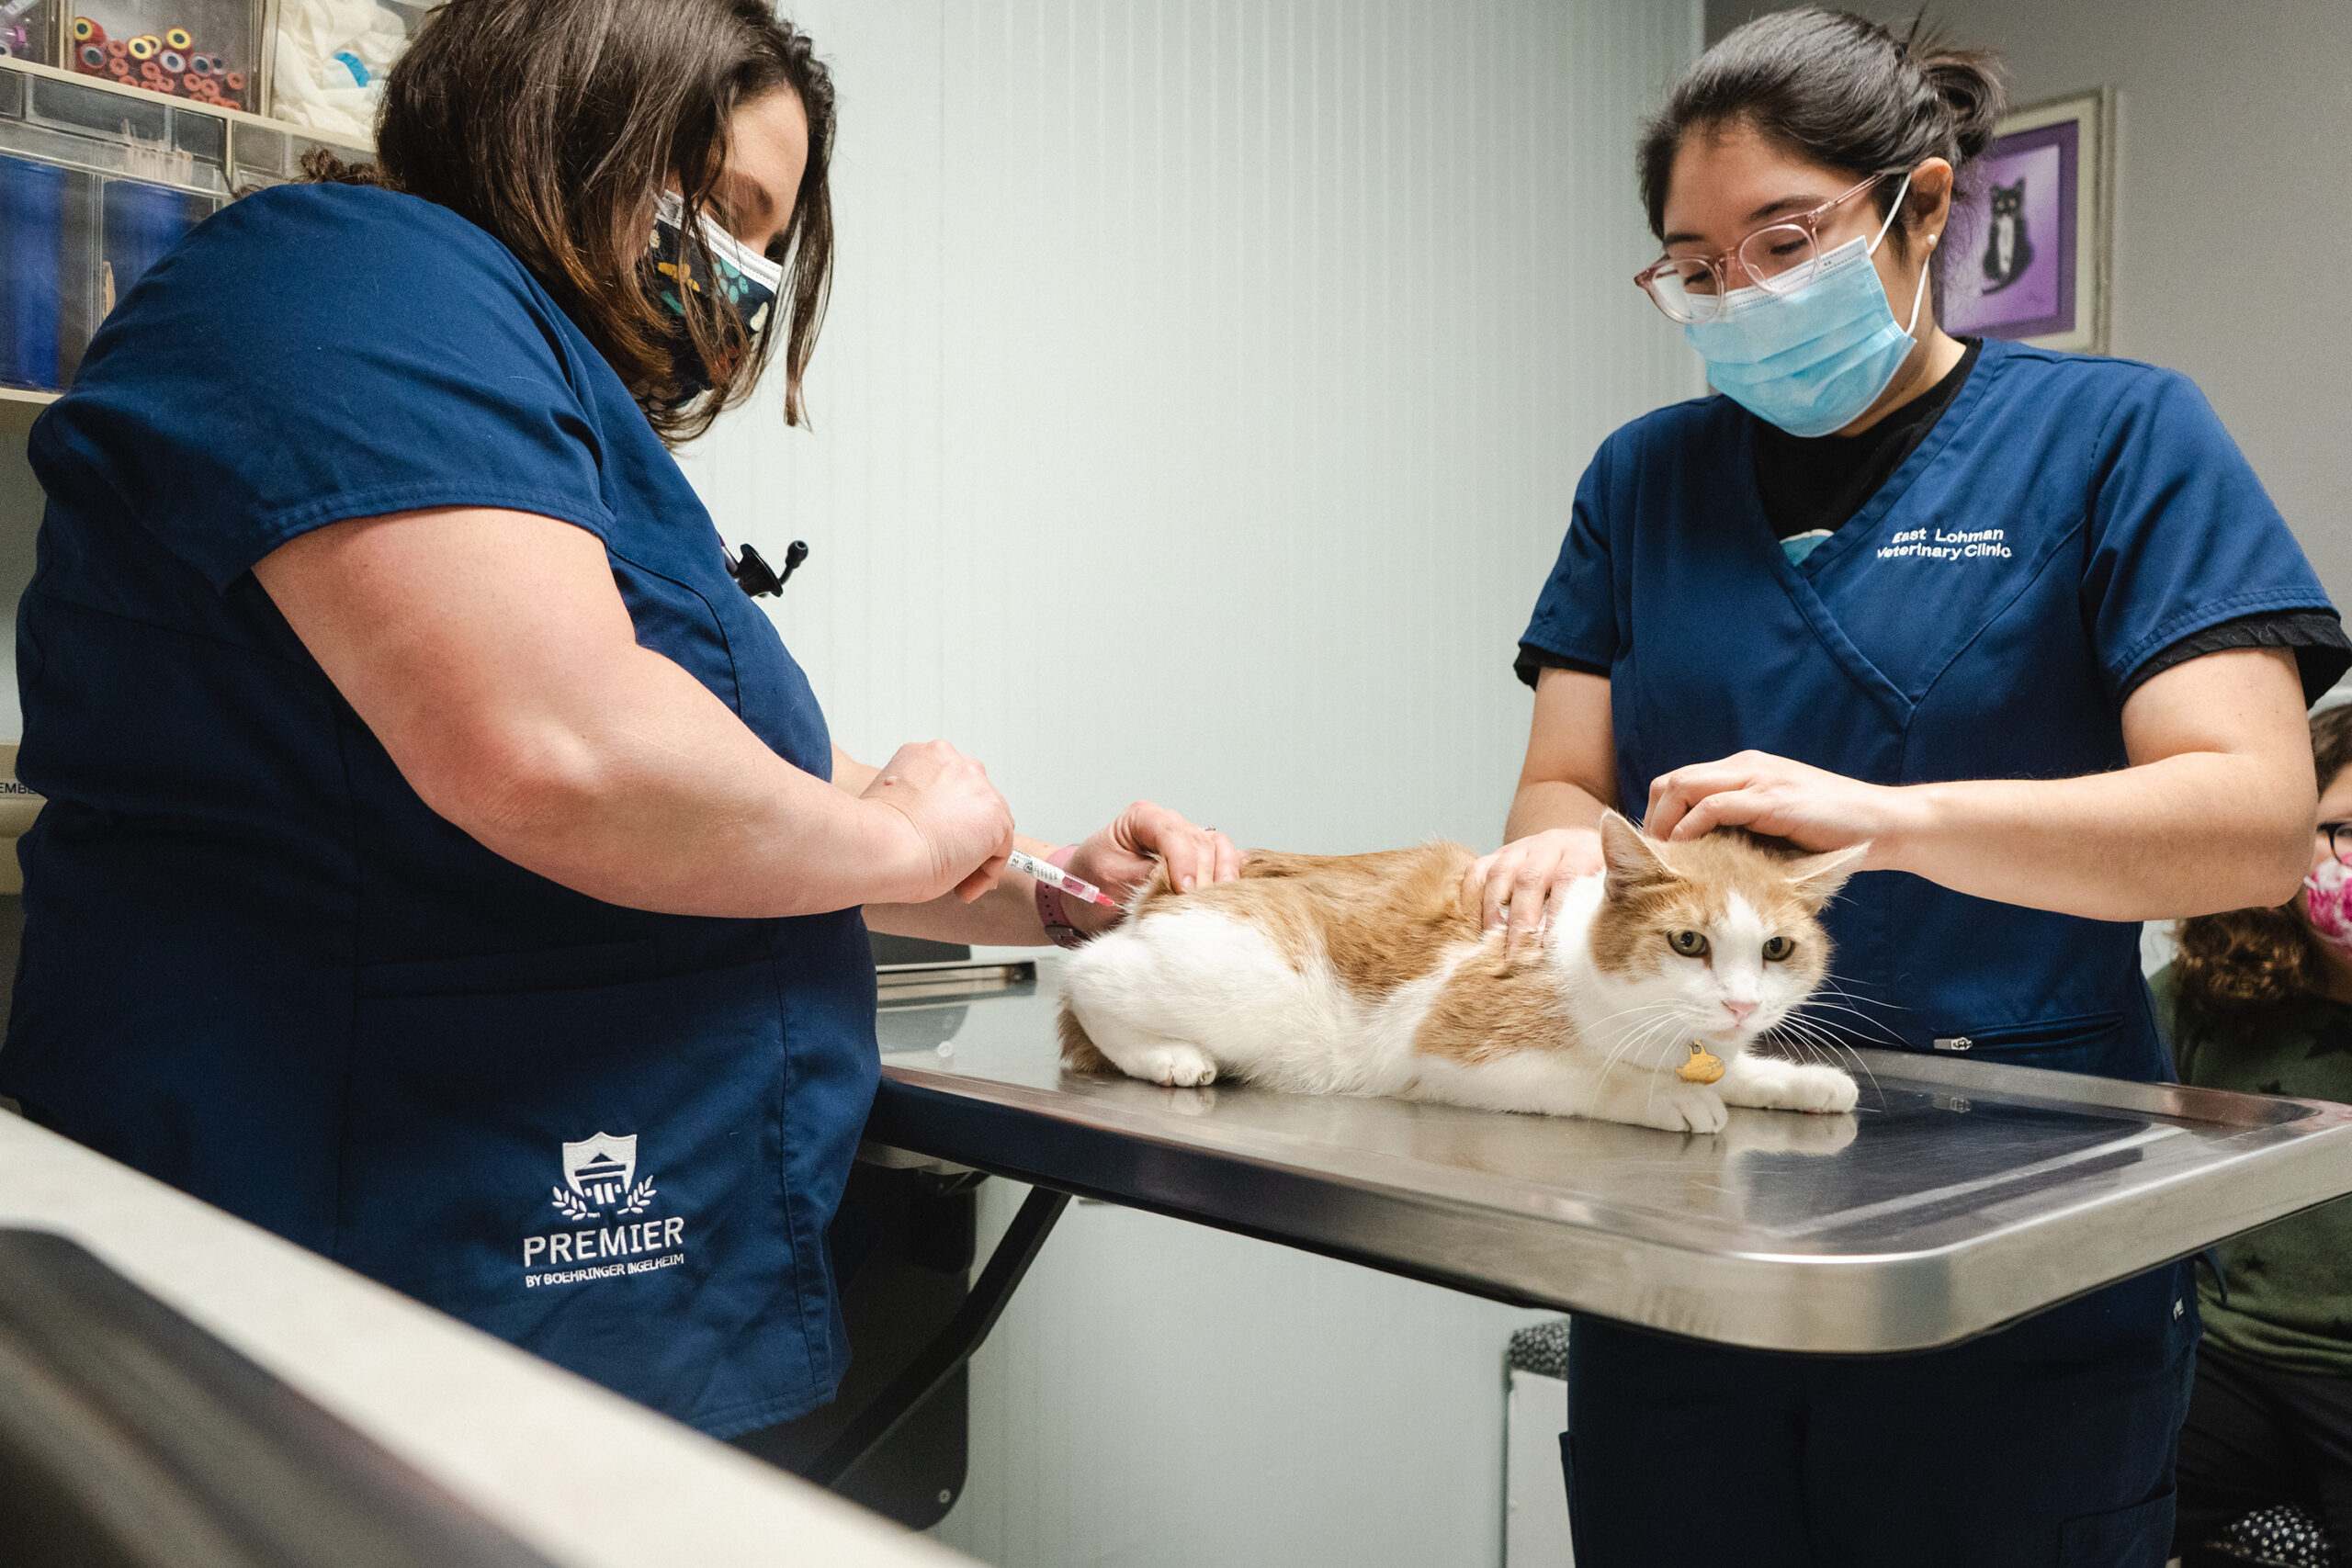 Dr. Ross injecting a needle into a cat